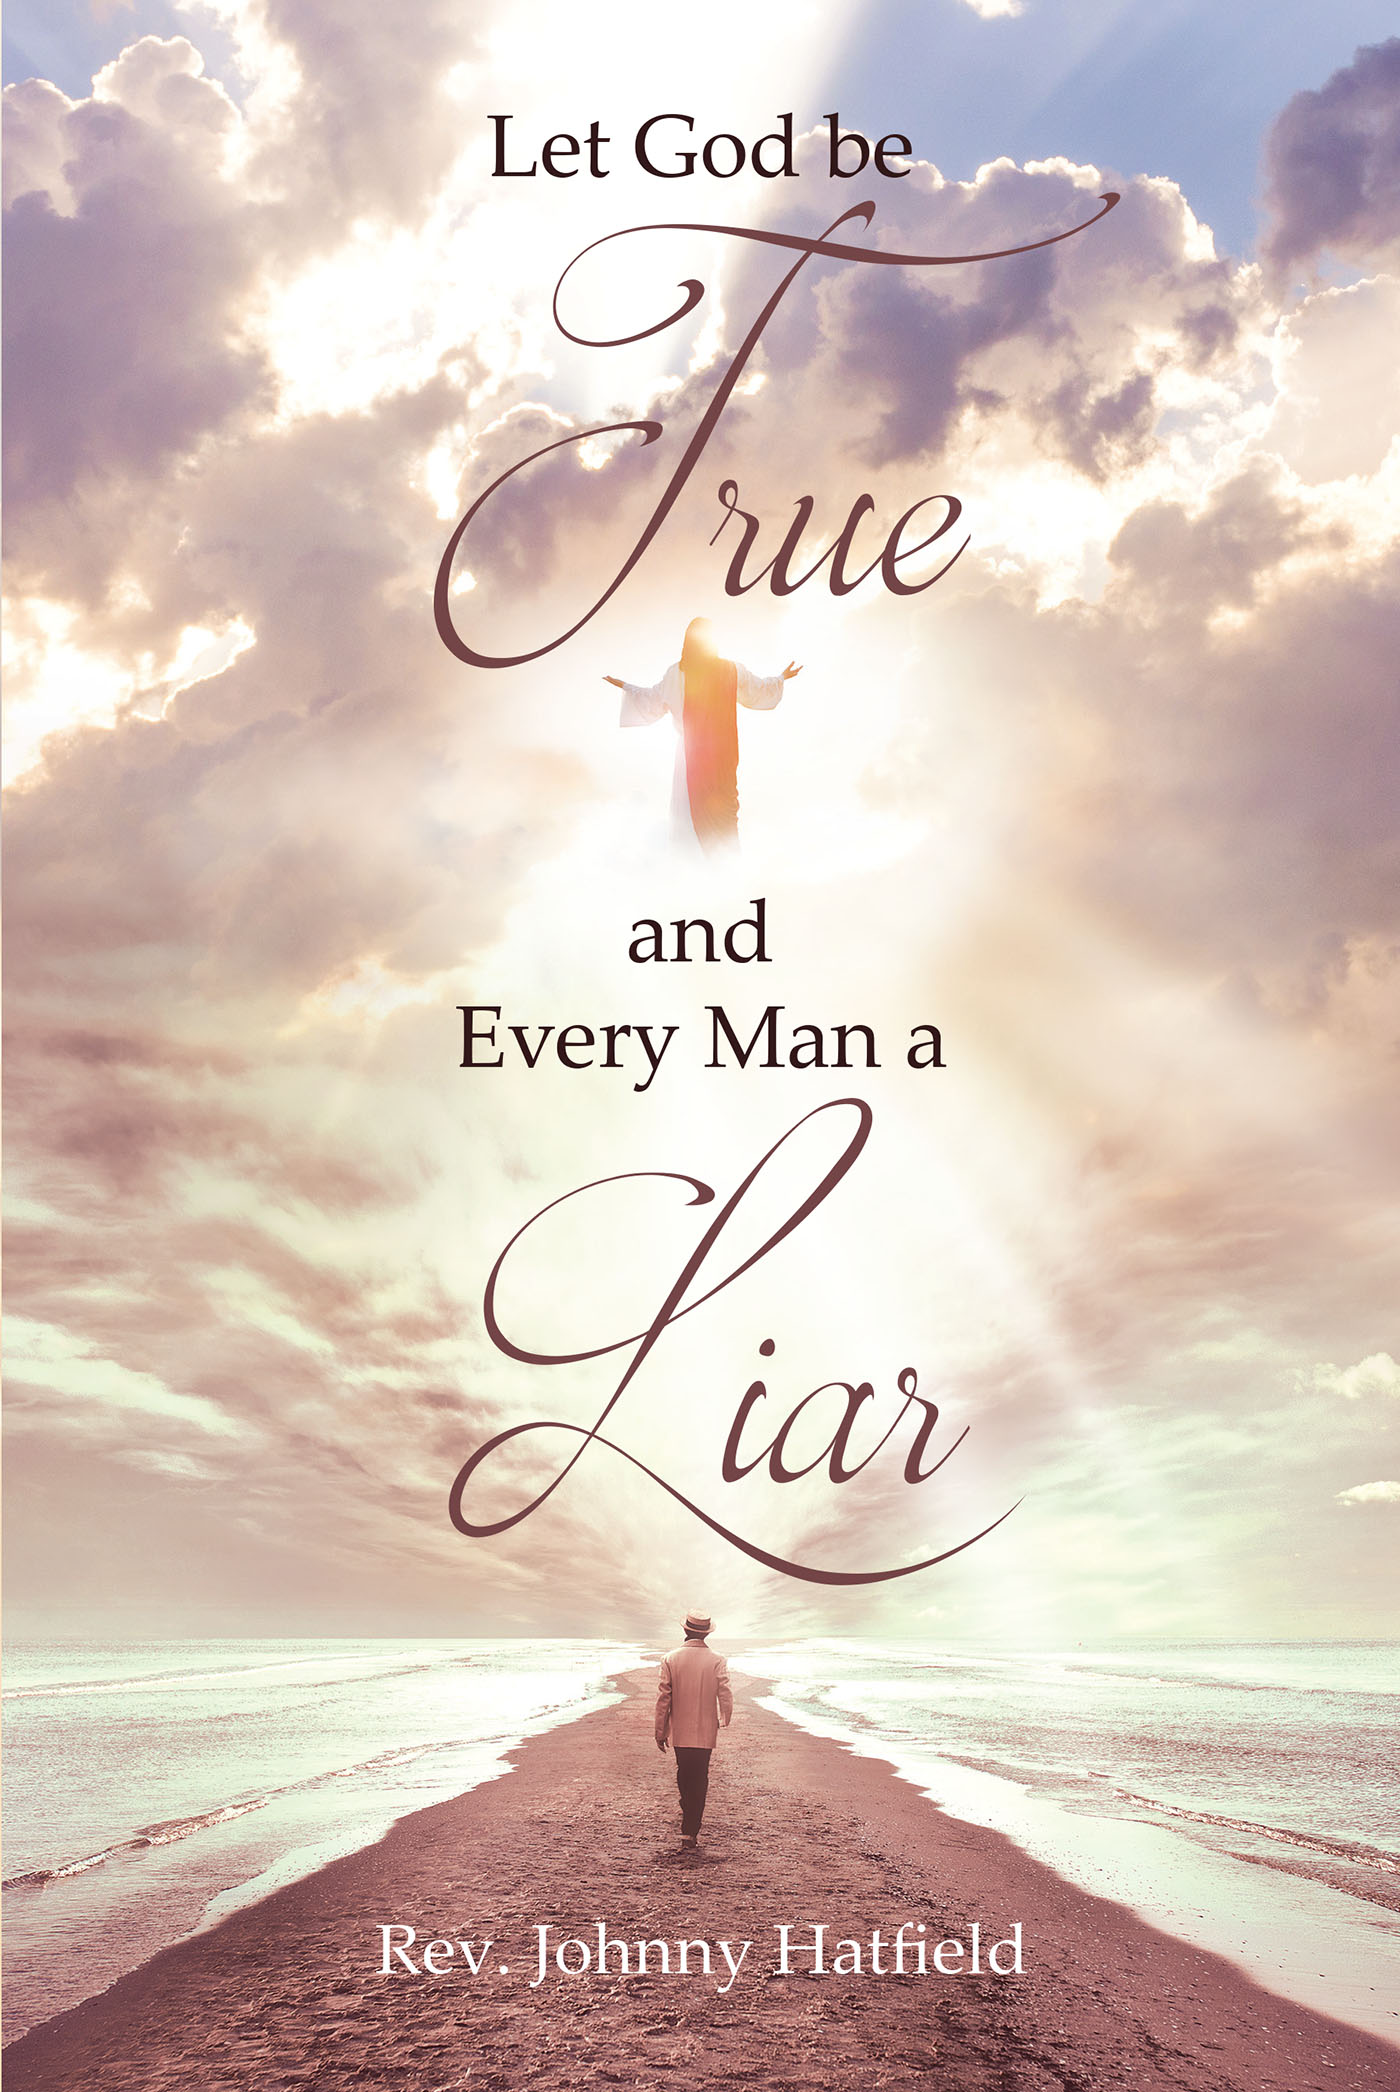 Rev. Johnny Hatfield’s Newly Released “Let God be True and Every Man a Liar” is a Thought-Provoking Examination of God’s True Word